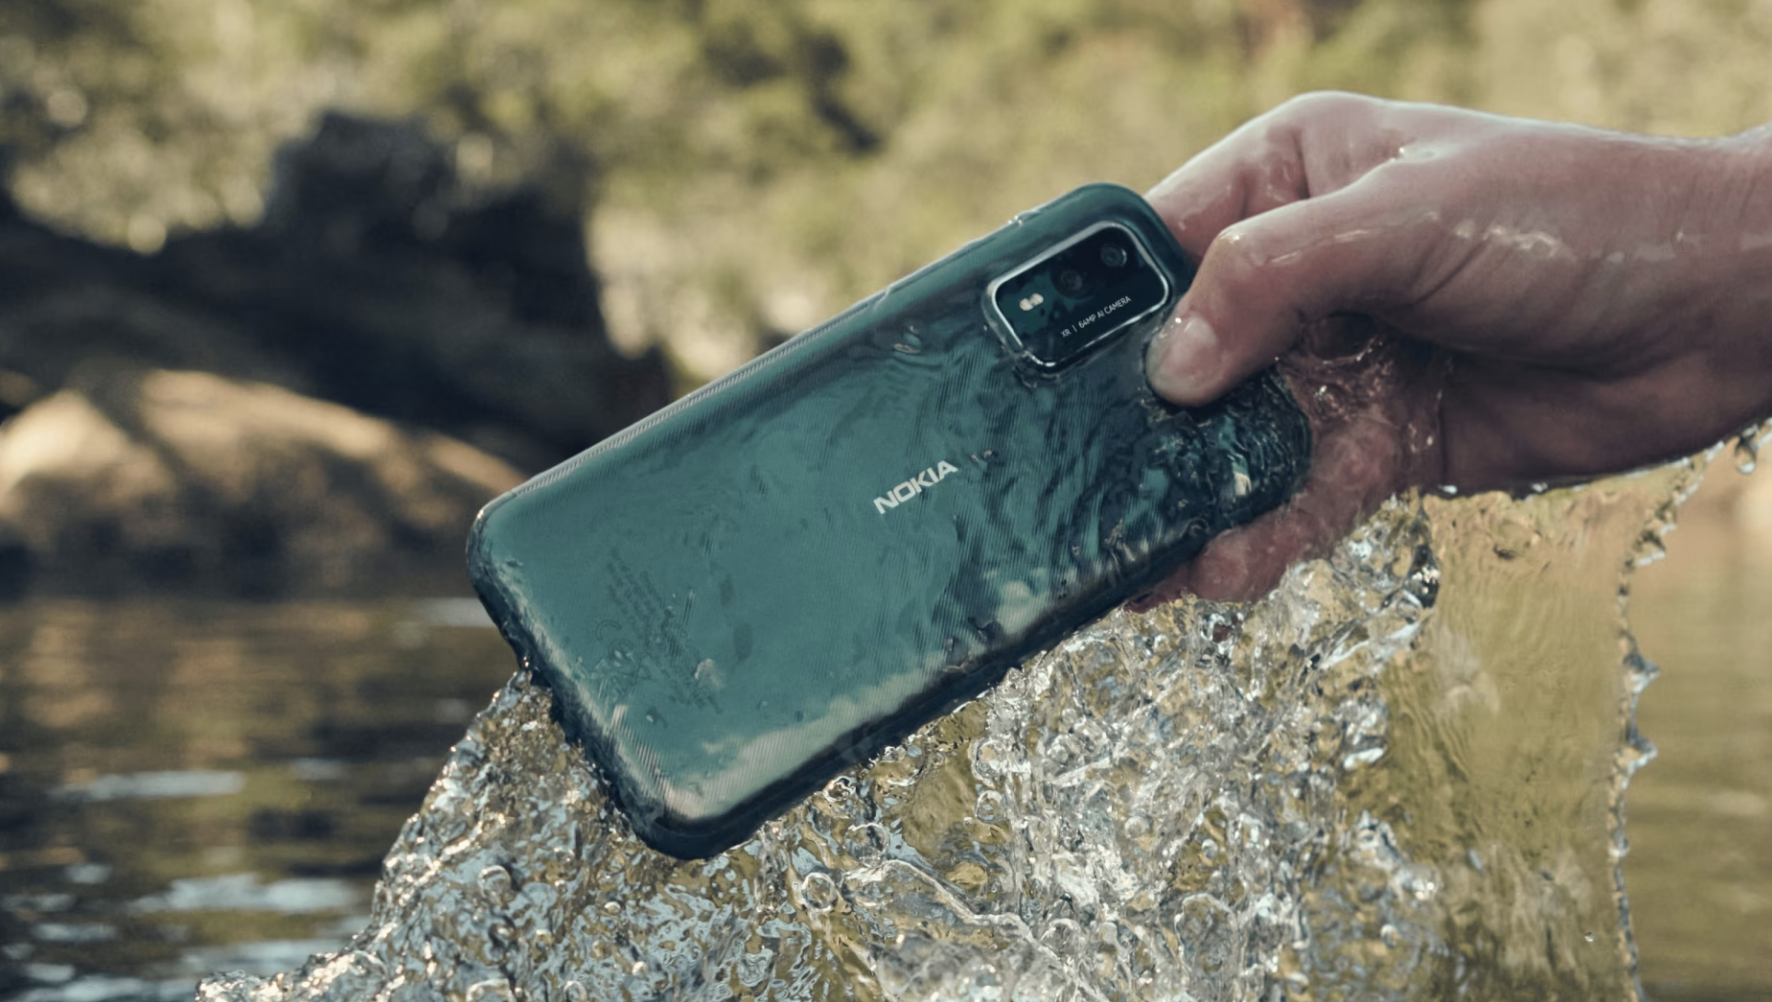 HMD is expanding beyond Nokia to their own brand of smartphones